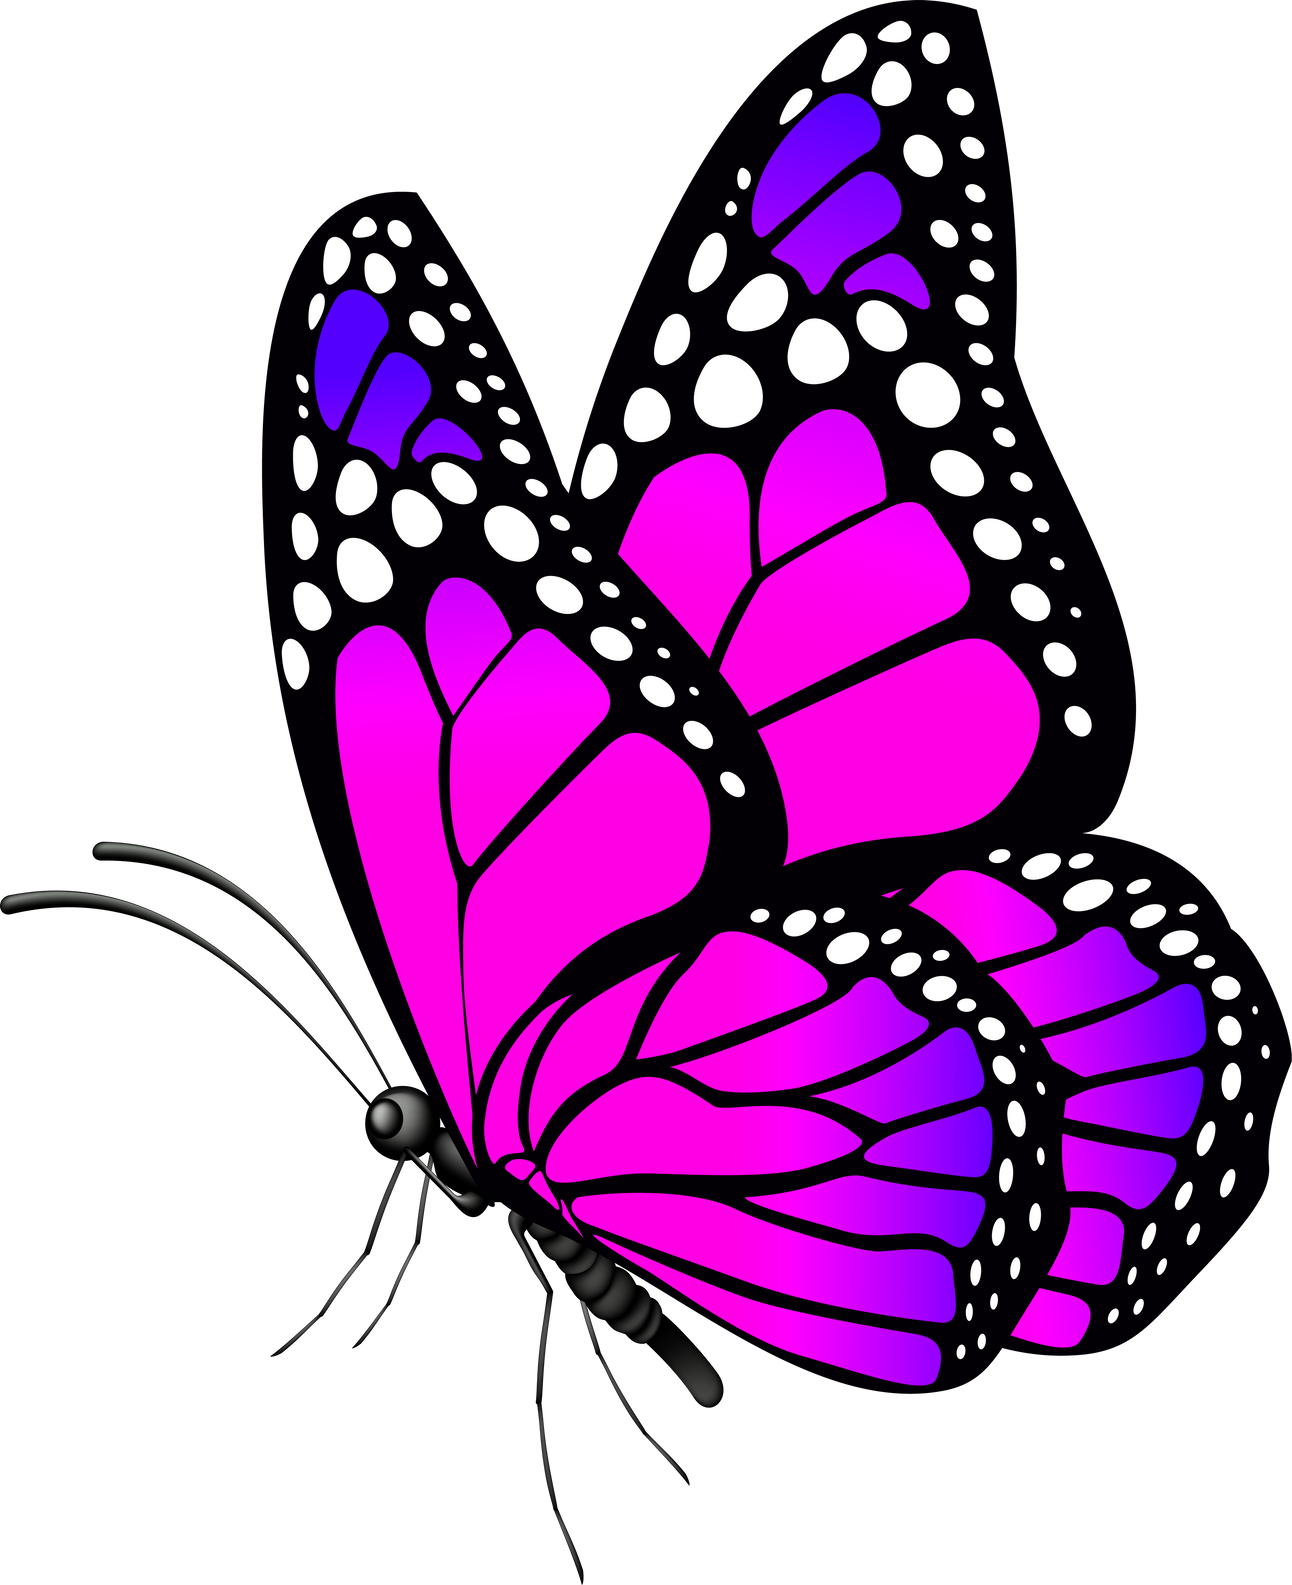 purple and blue butterfly illustration